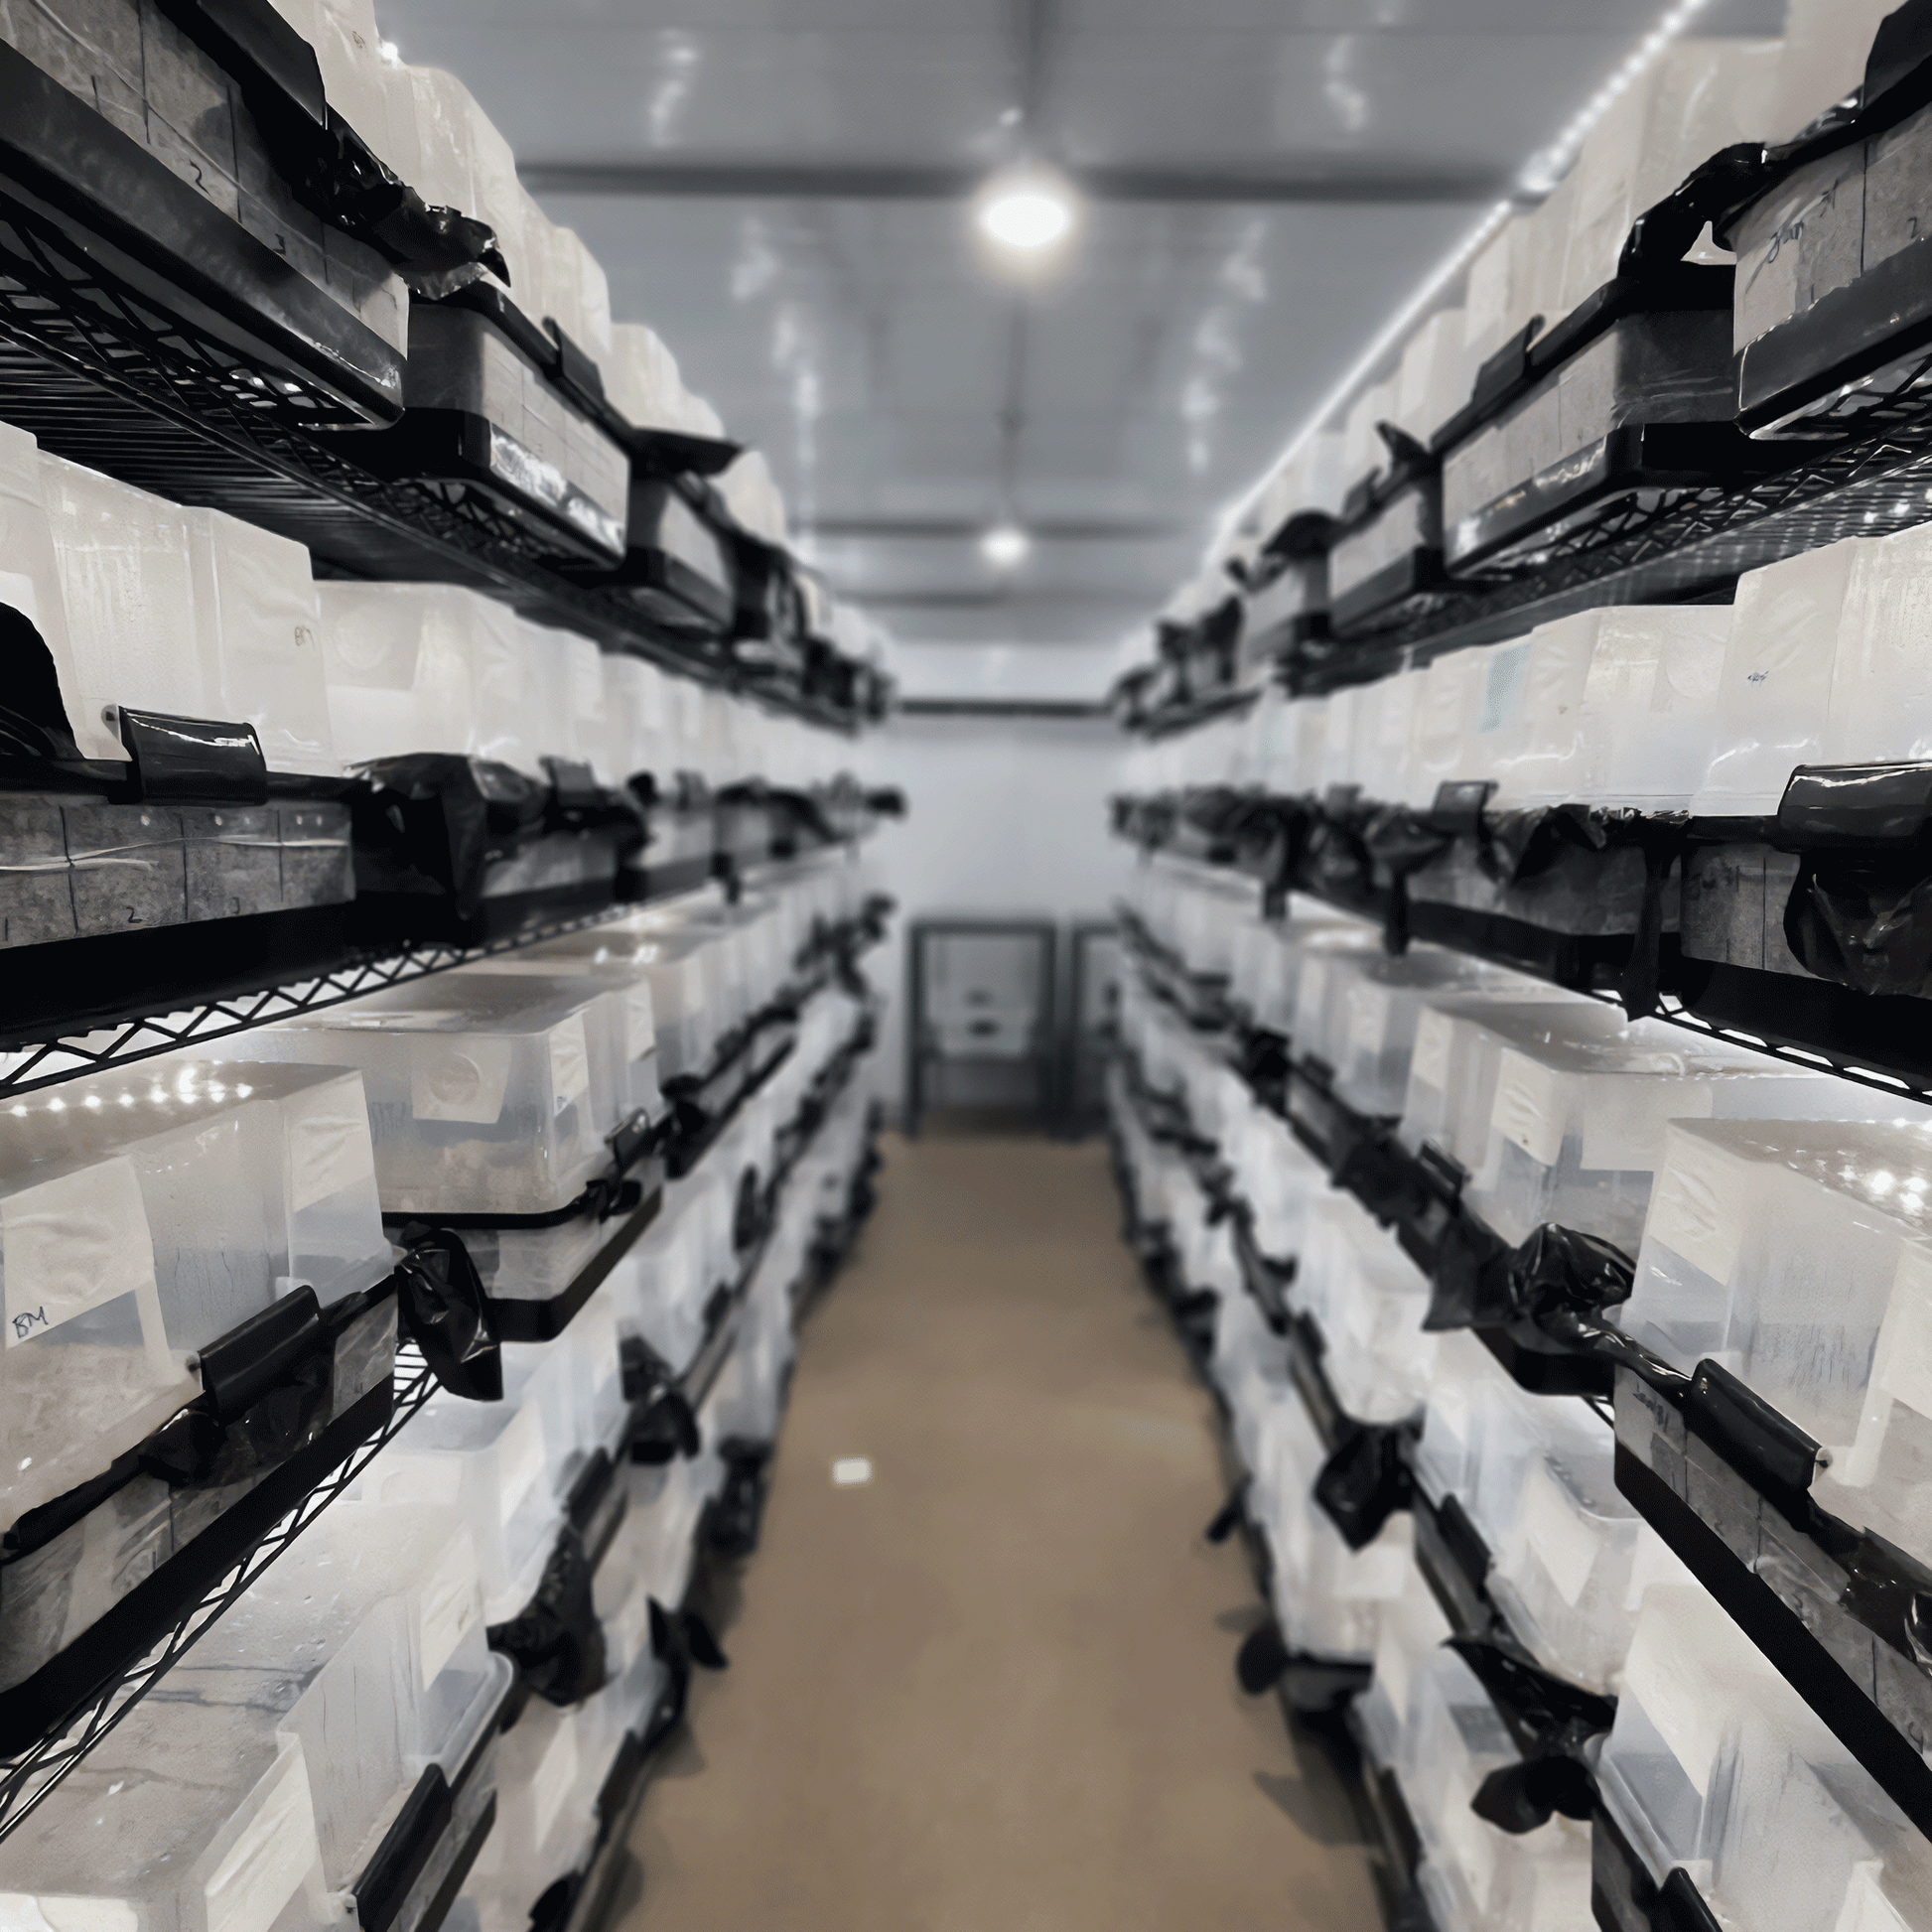 A long aisle view inside a cultivation room with rows of metal shelving holding numerous Max Yield V1 Monotubs with clear lids and black bases.